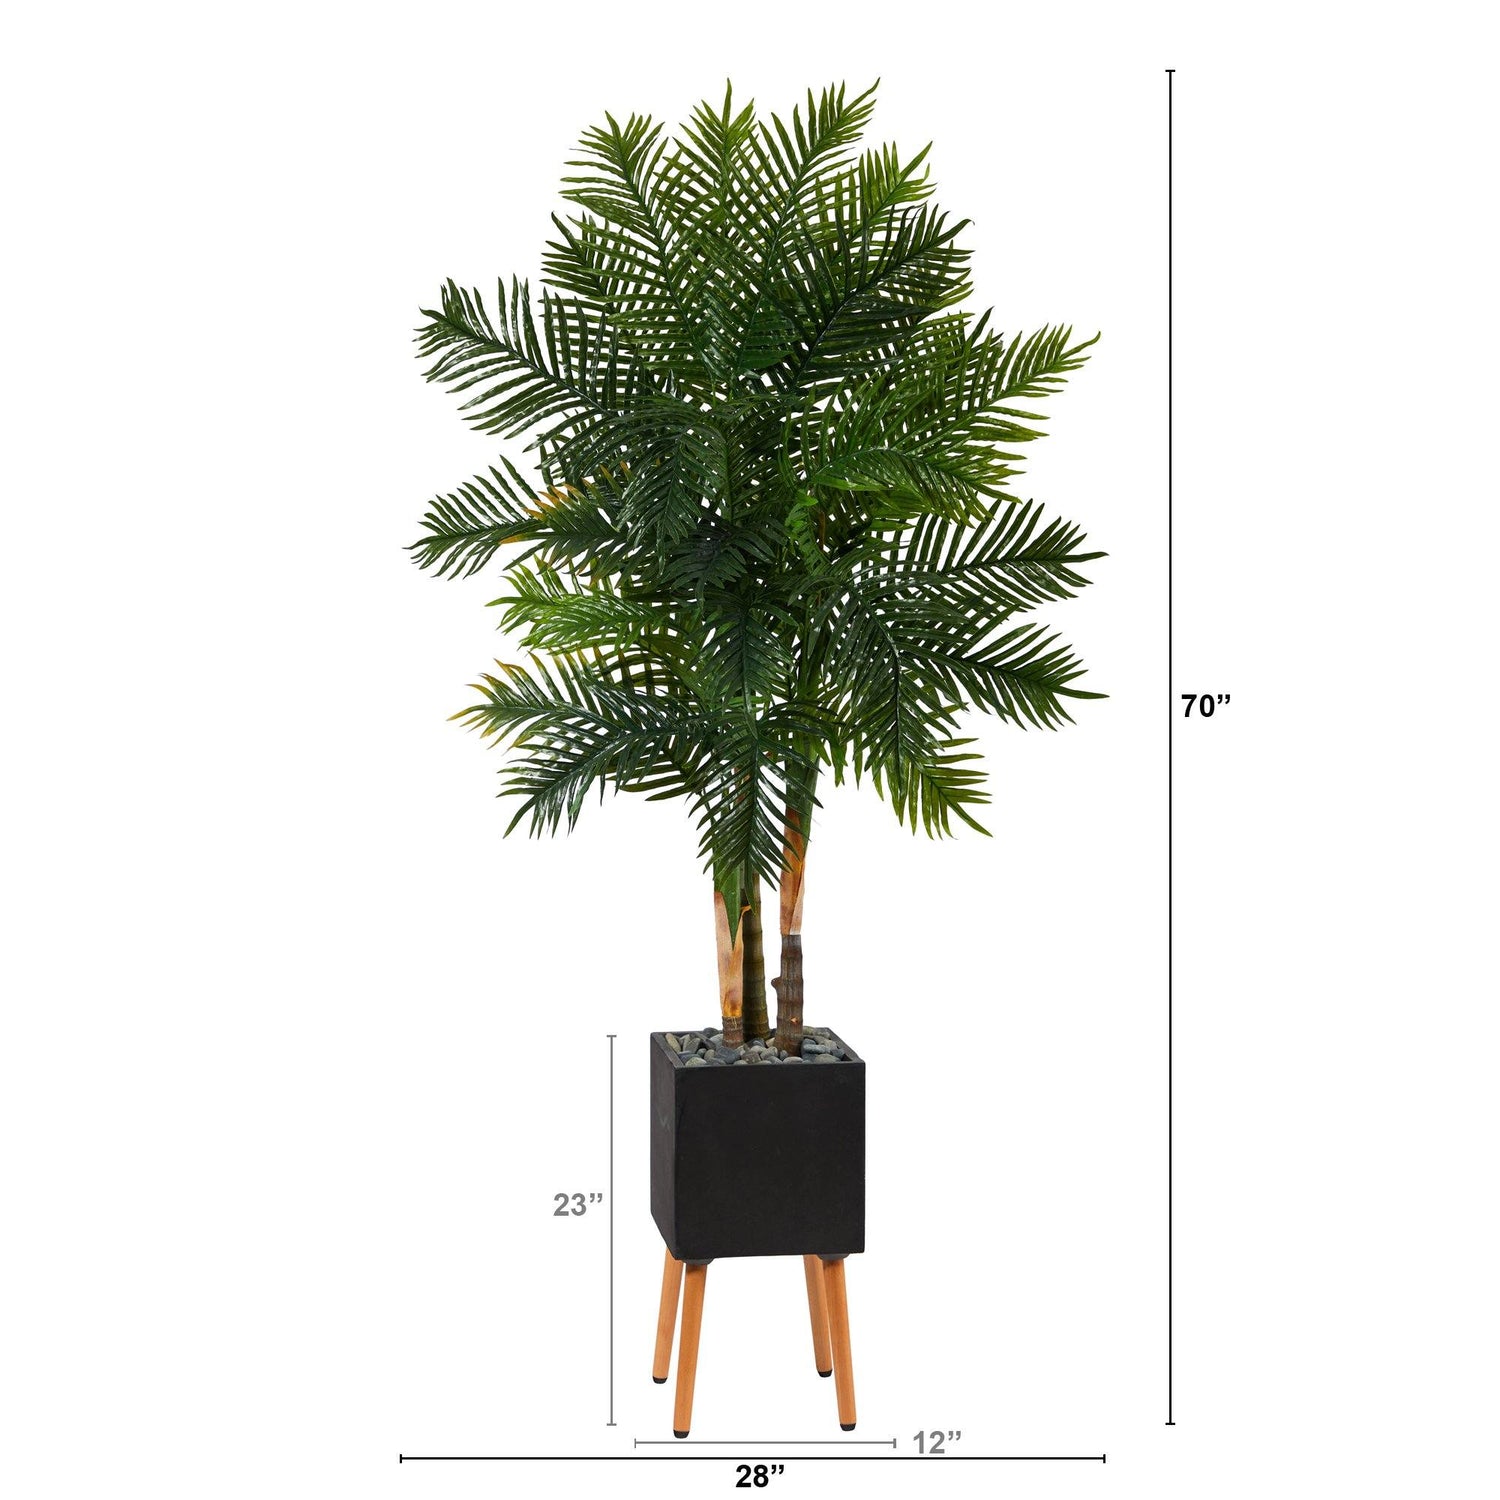 70” Areca Palm Artificial Tree in Black Planter with Stand